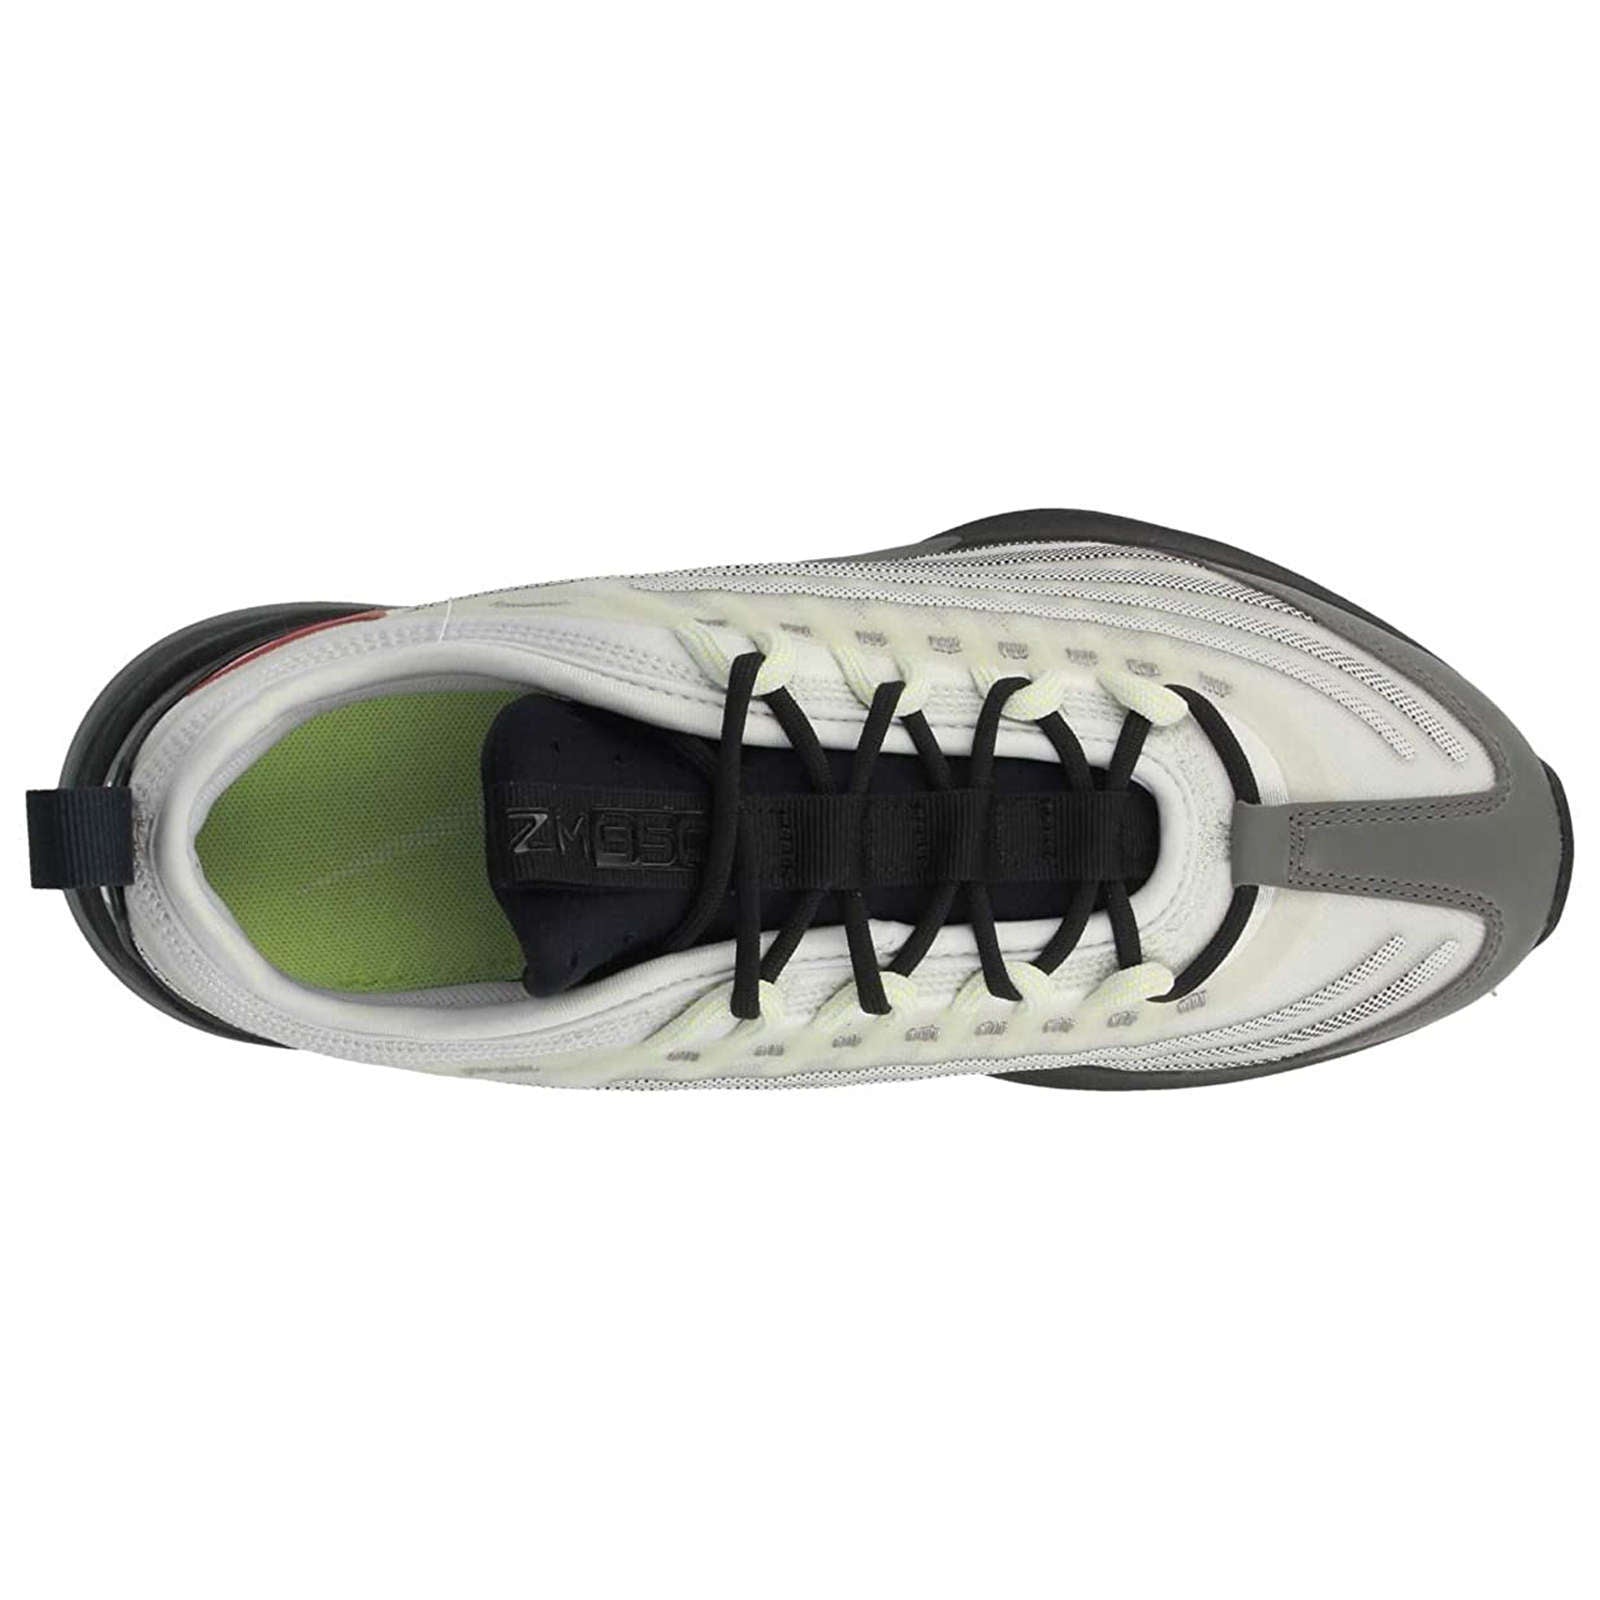 Air Max ZM950 NRG Synthetic Textile Unisex Low-Top Trainers